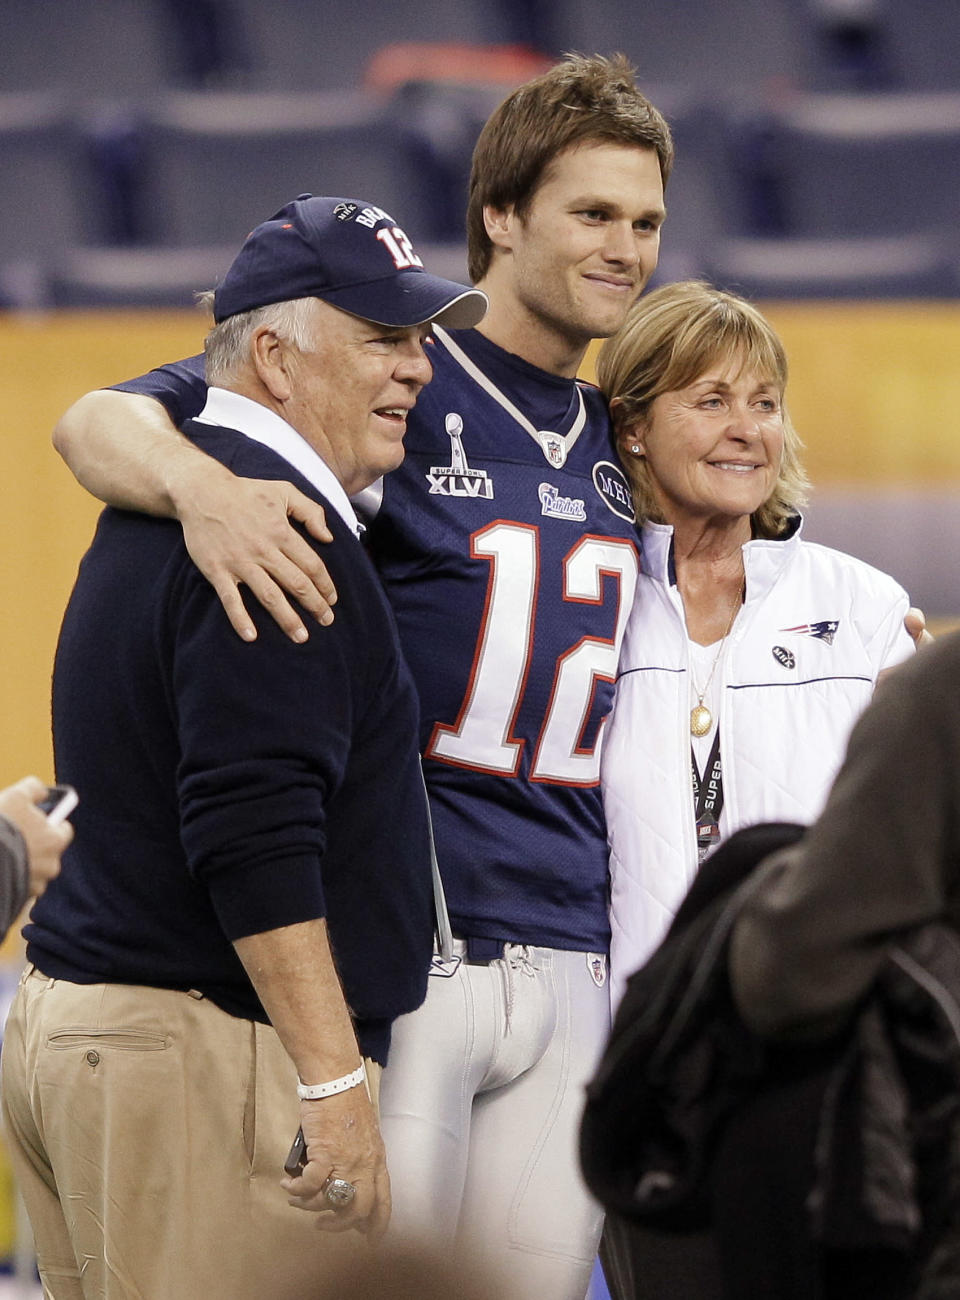 New England Patriots quarterback Tom Brady (12) poses for a photo with his parents, Tom and Galynn Brady, in Lucas Oil Stadium on Saturday, Feb. 4, 2012, in Indianapolis. The Patriots are scheduled to face the New York Giants in NFL football Super Bowl XLVI on Feb. 5. (AP Photo/Mark Humphrey)